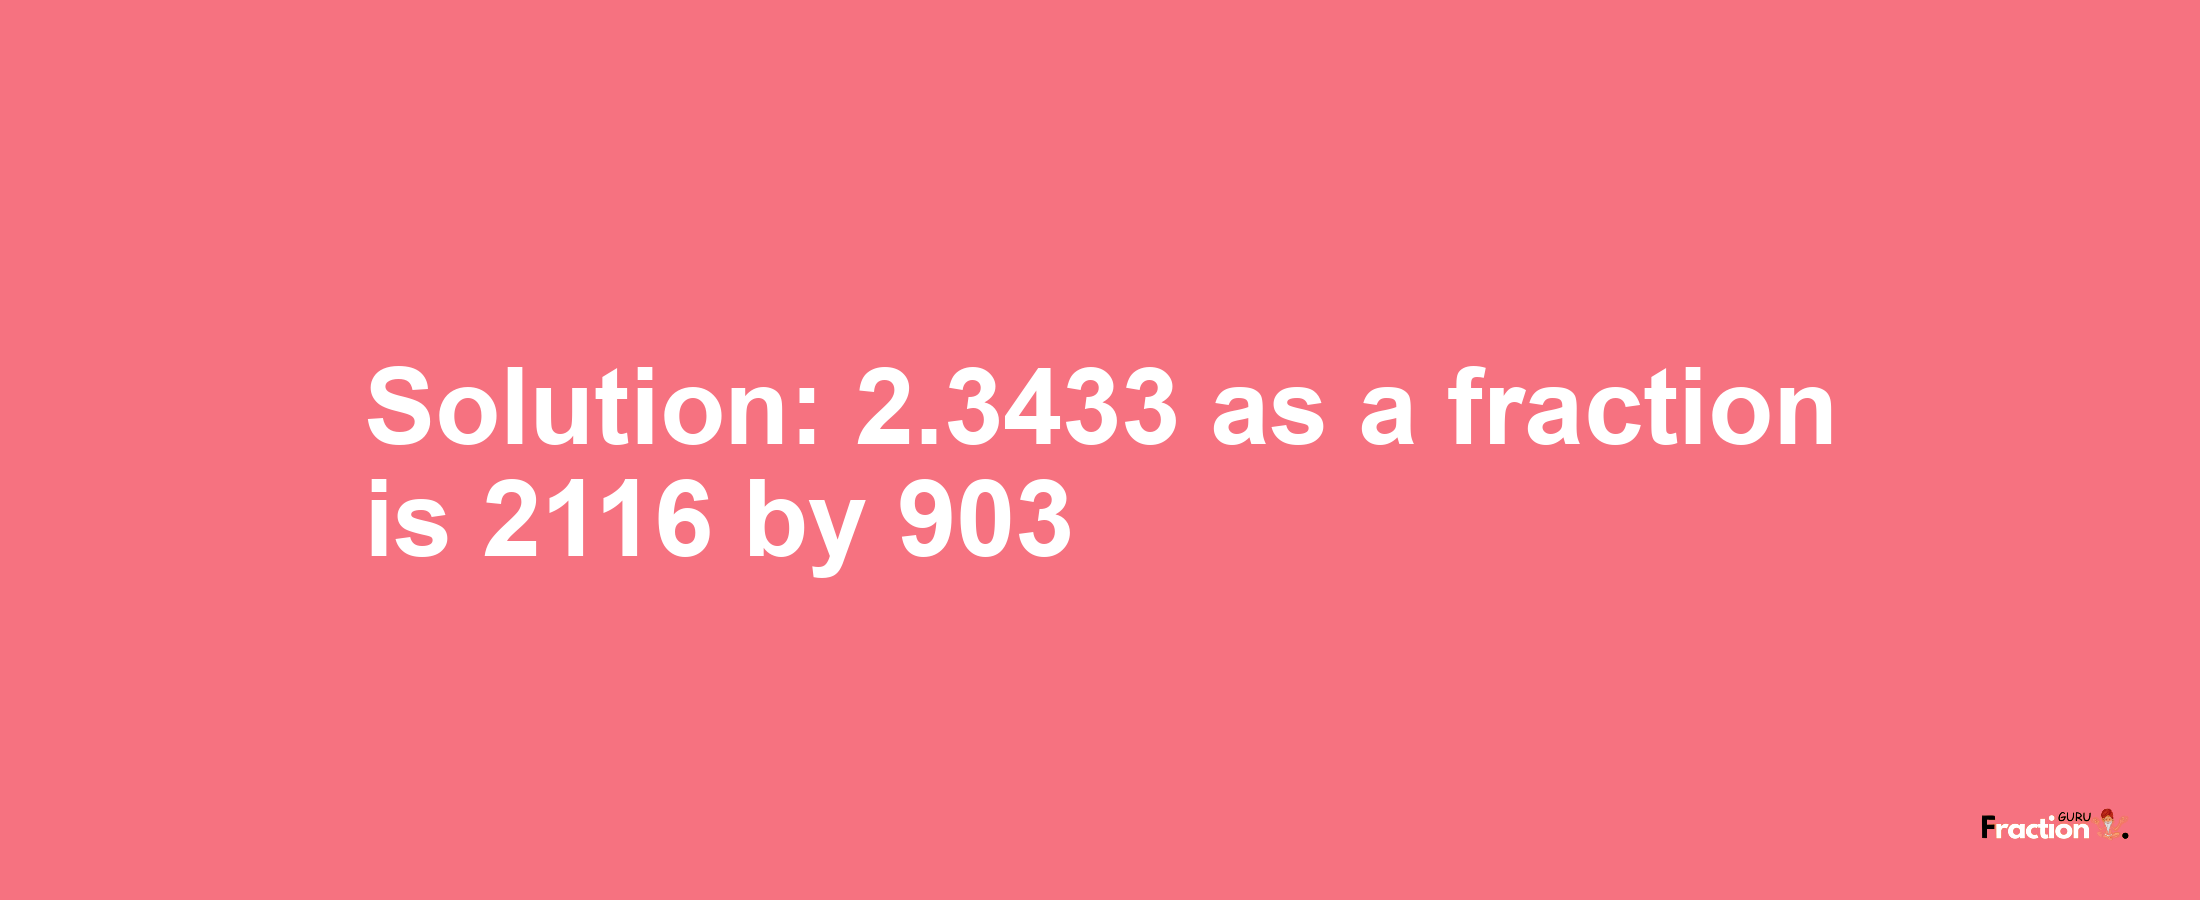 Solution:2.3433 as a fraction is 2116/903